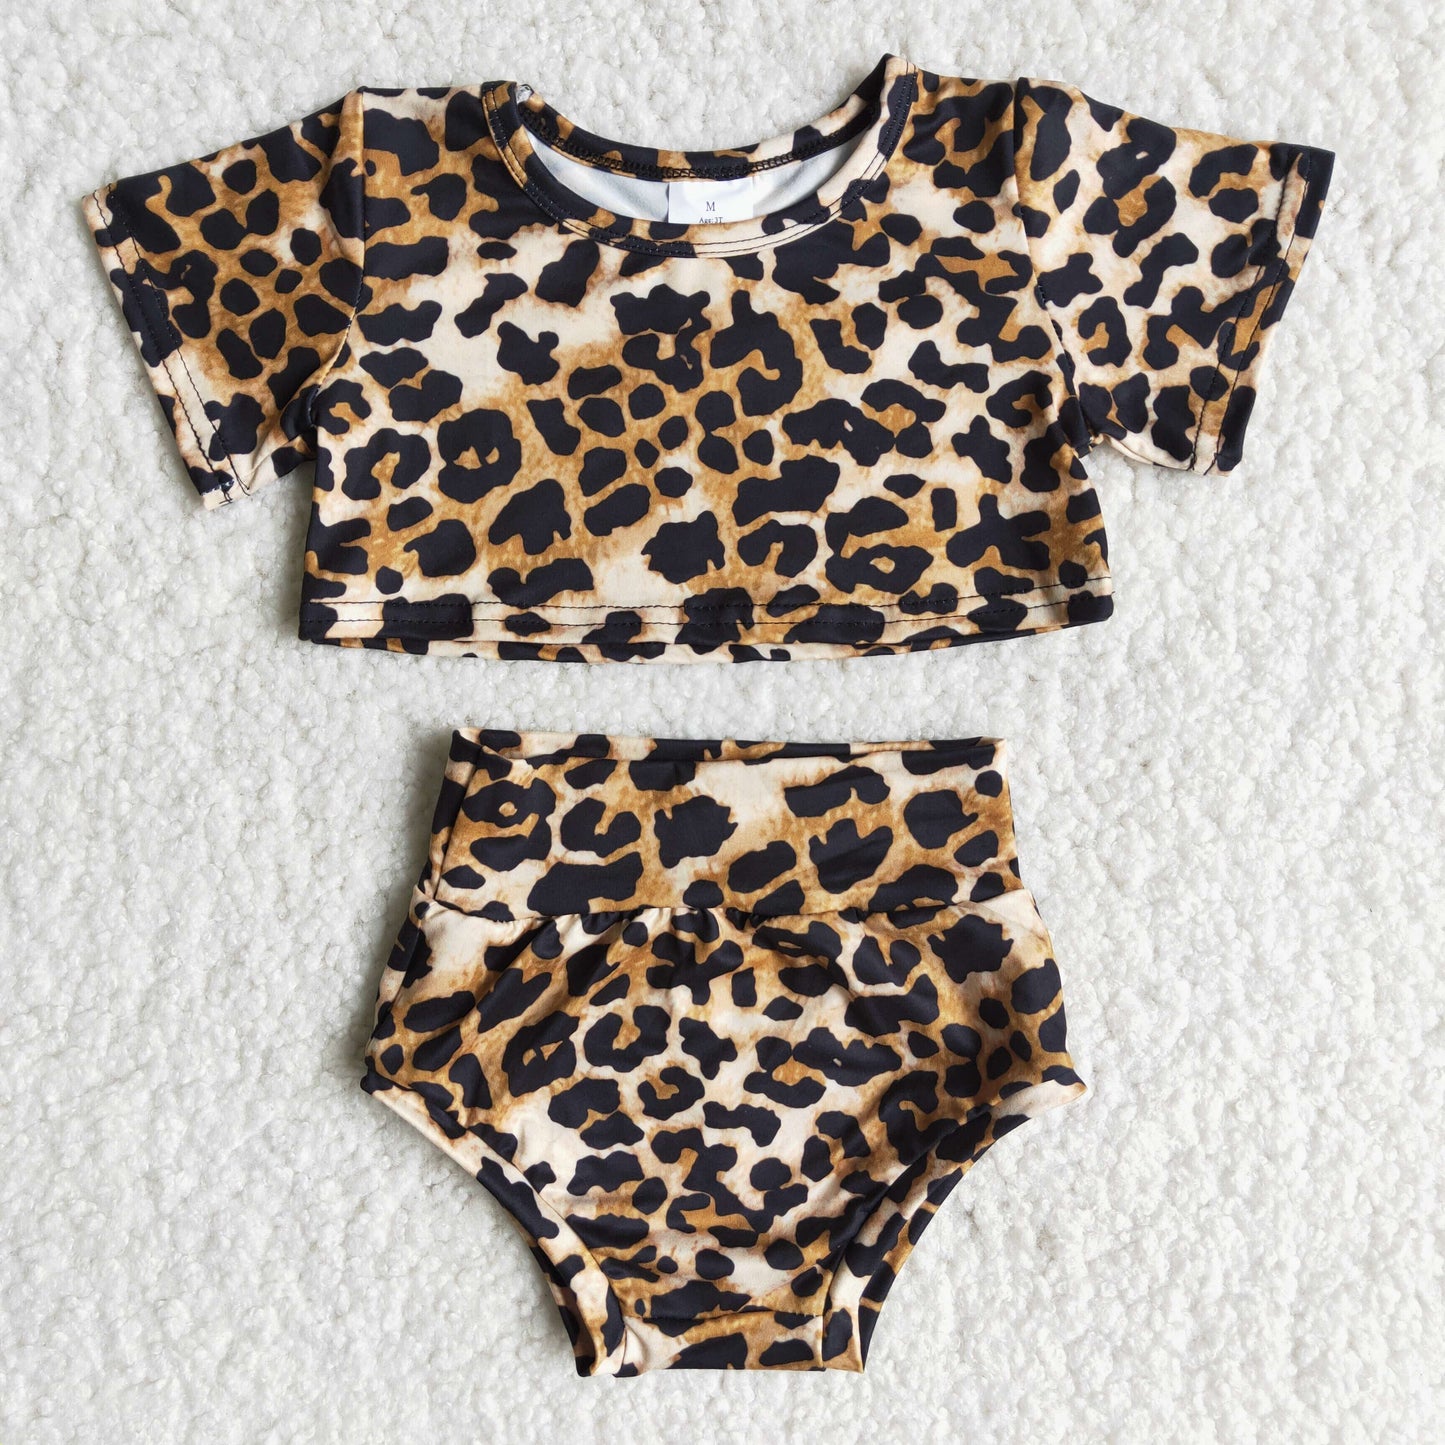 snakeskin chic girls' bummies outfits